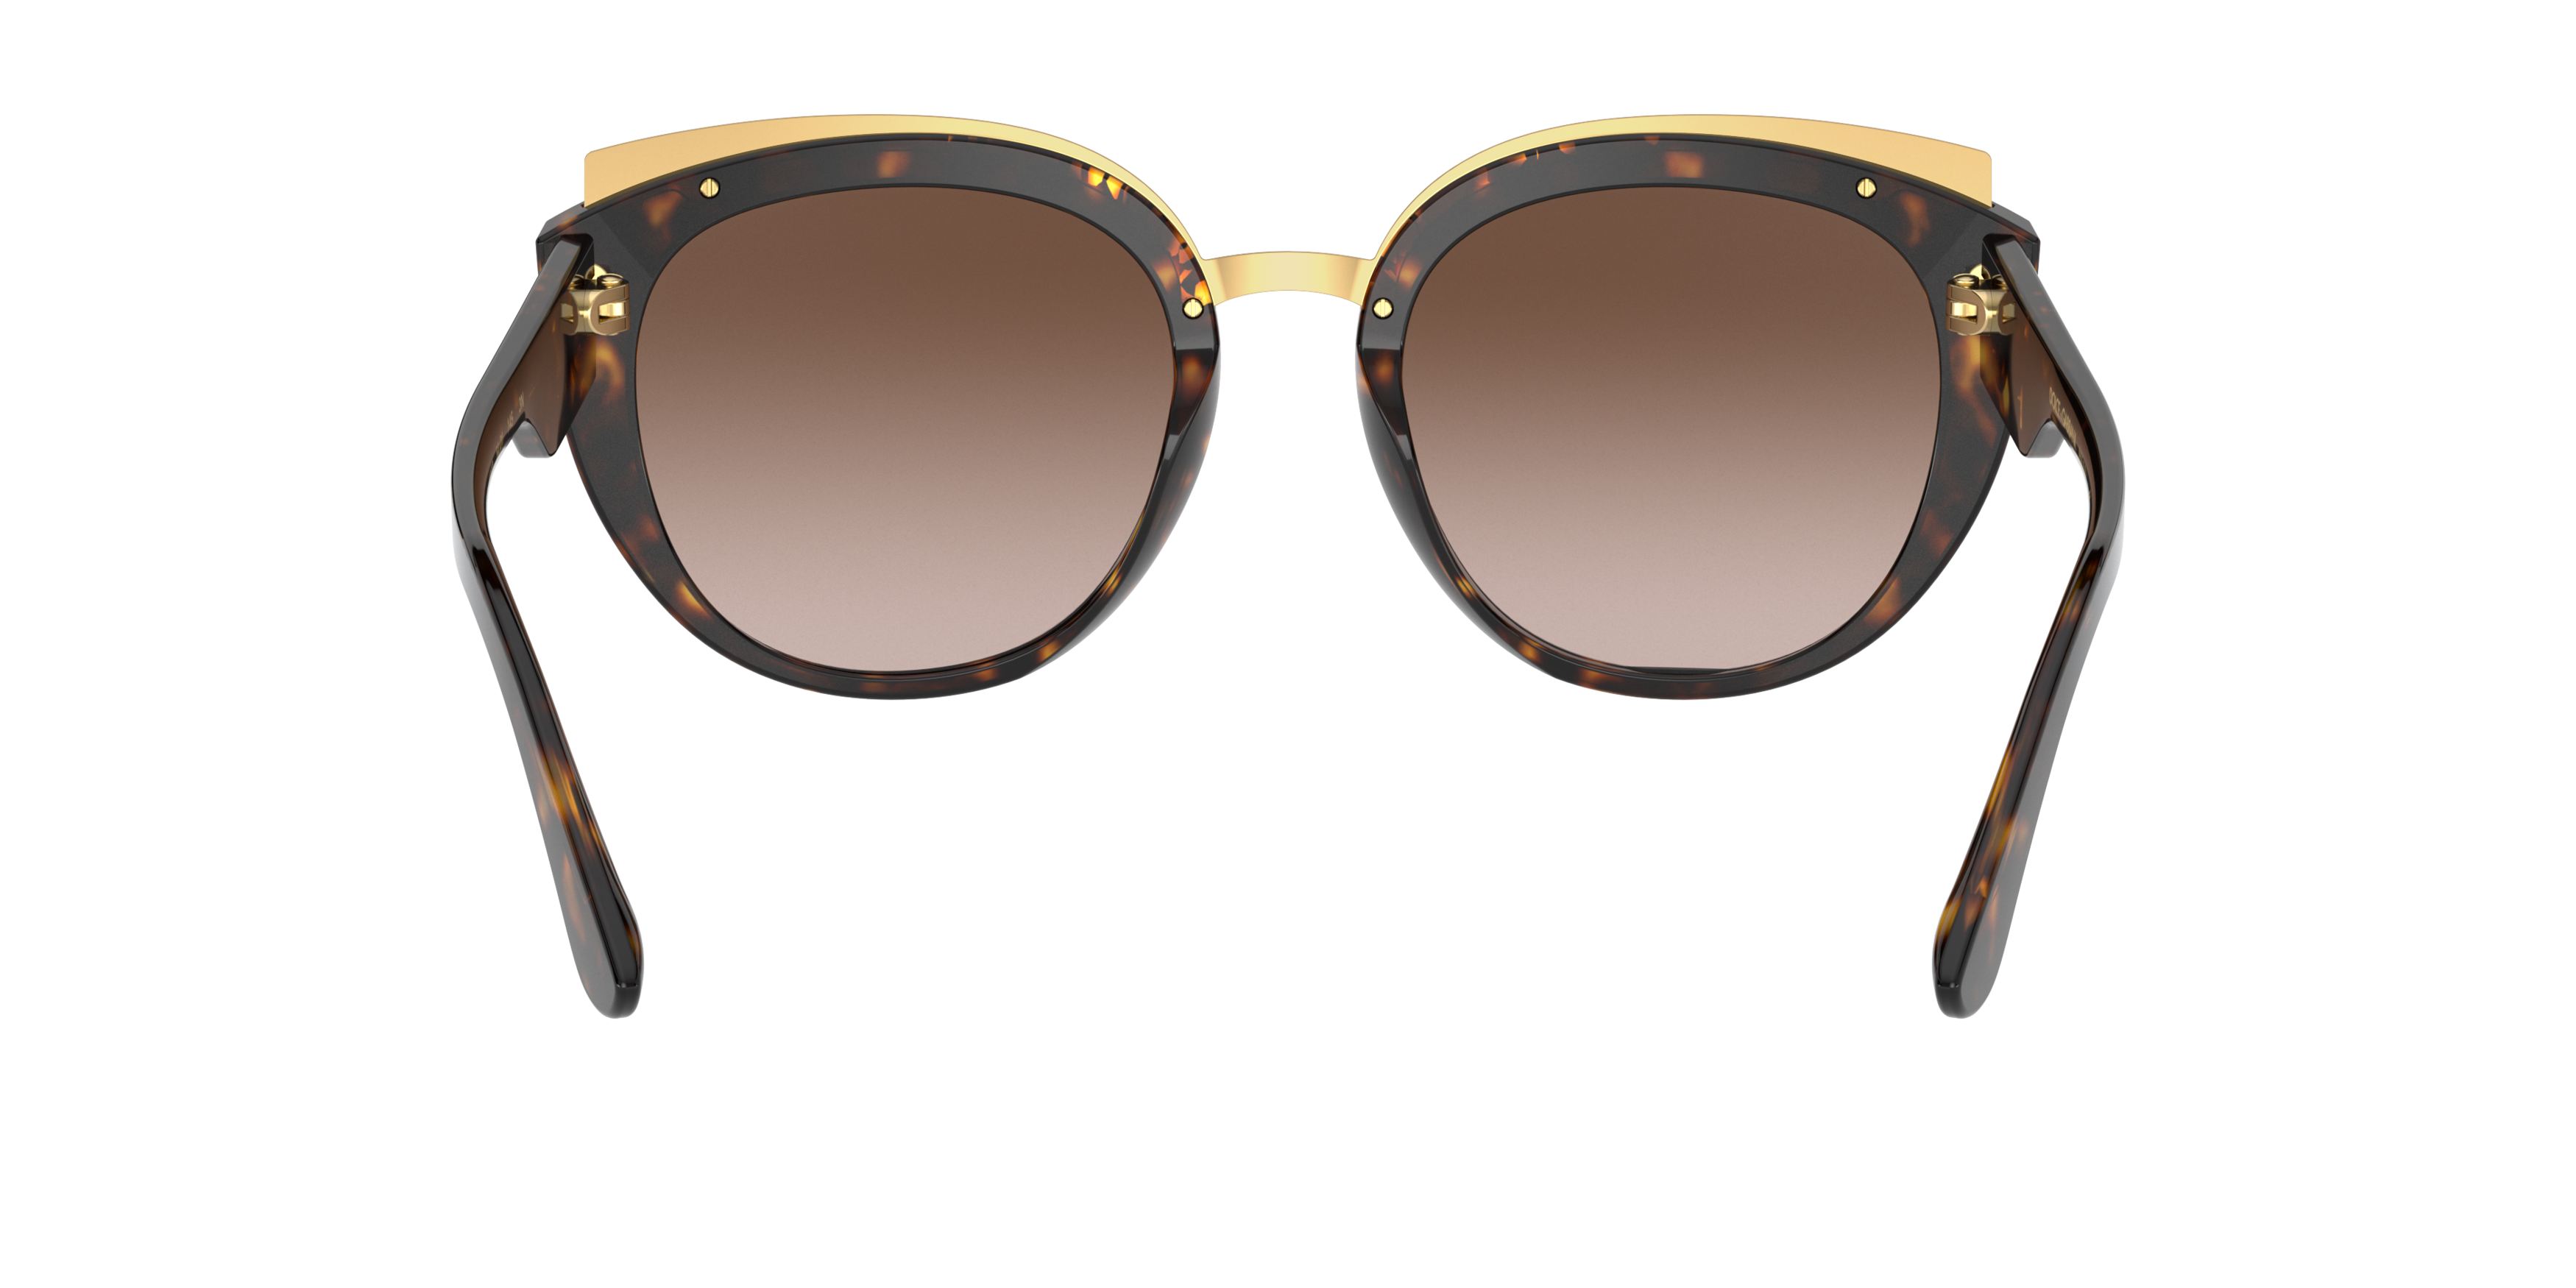 [products.image.detail02] DOLCE & GABBANA DG4383 502/13